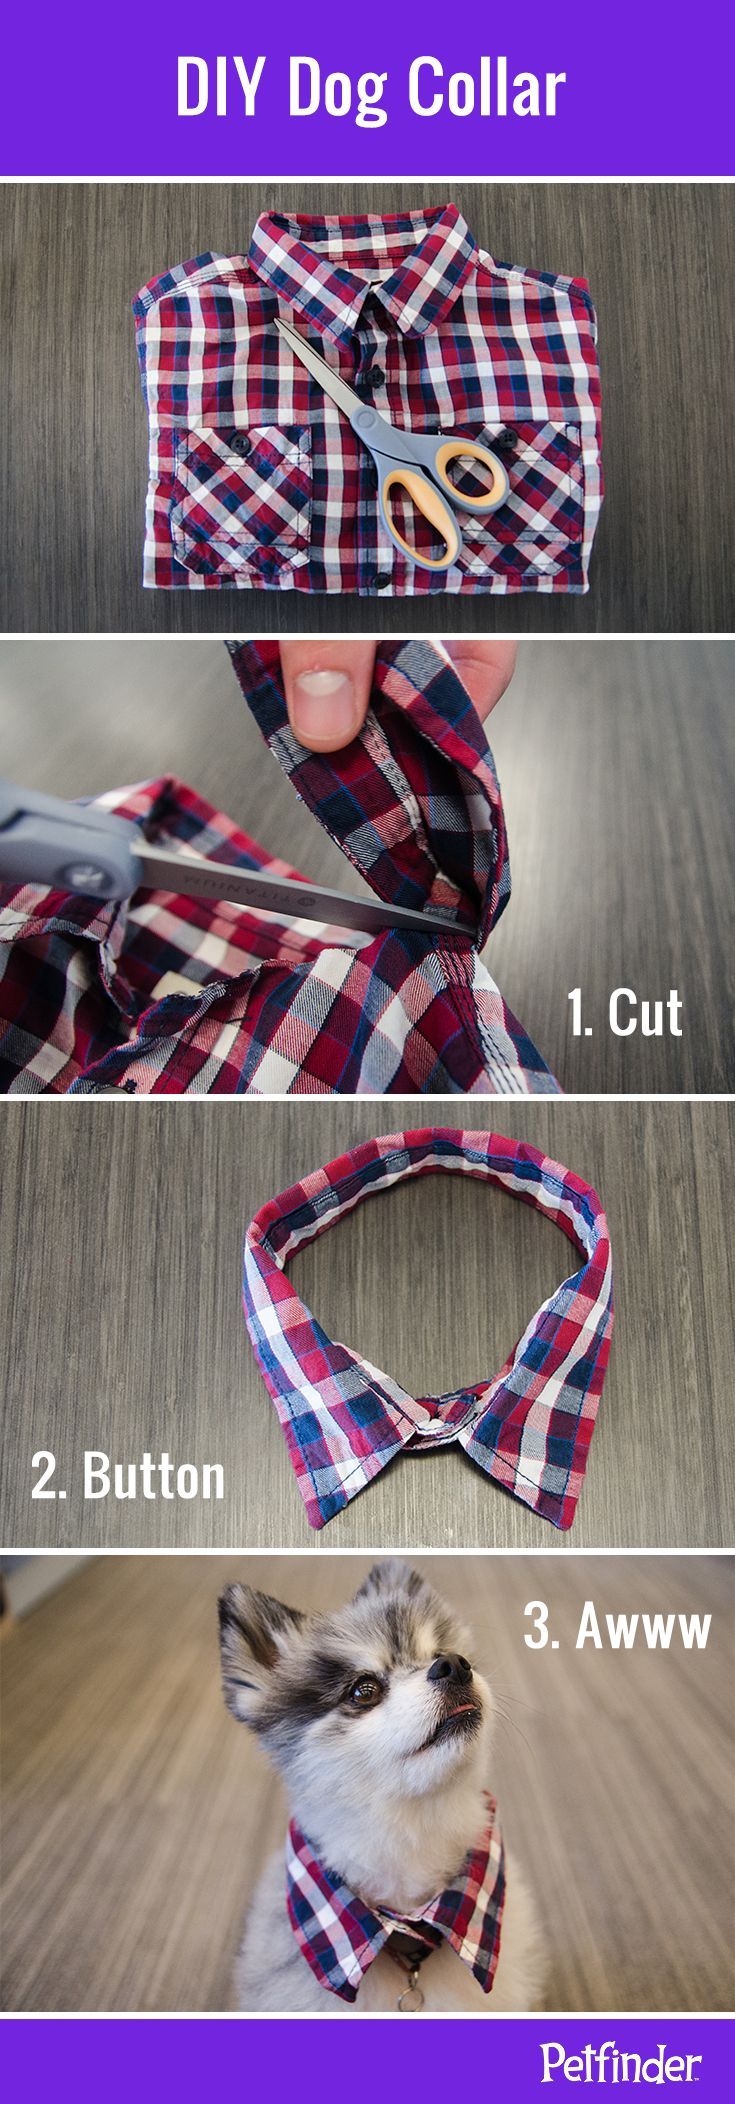 Fun DIY dog collar idea: trim the collar off a child-sized button-down shirt to make a cute collar for your pup. It’s a great way